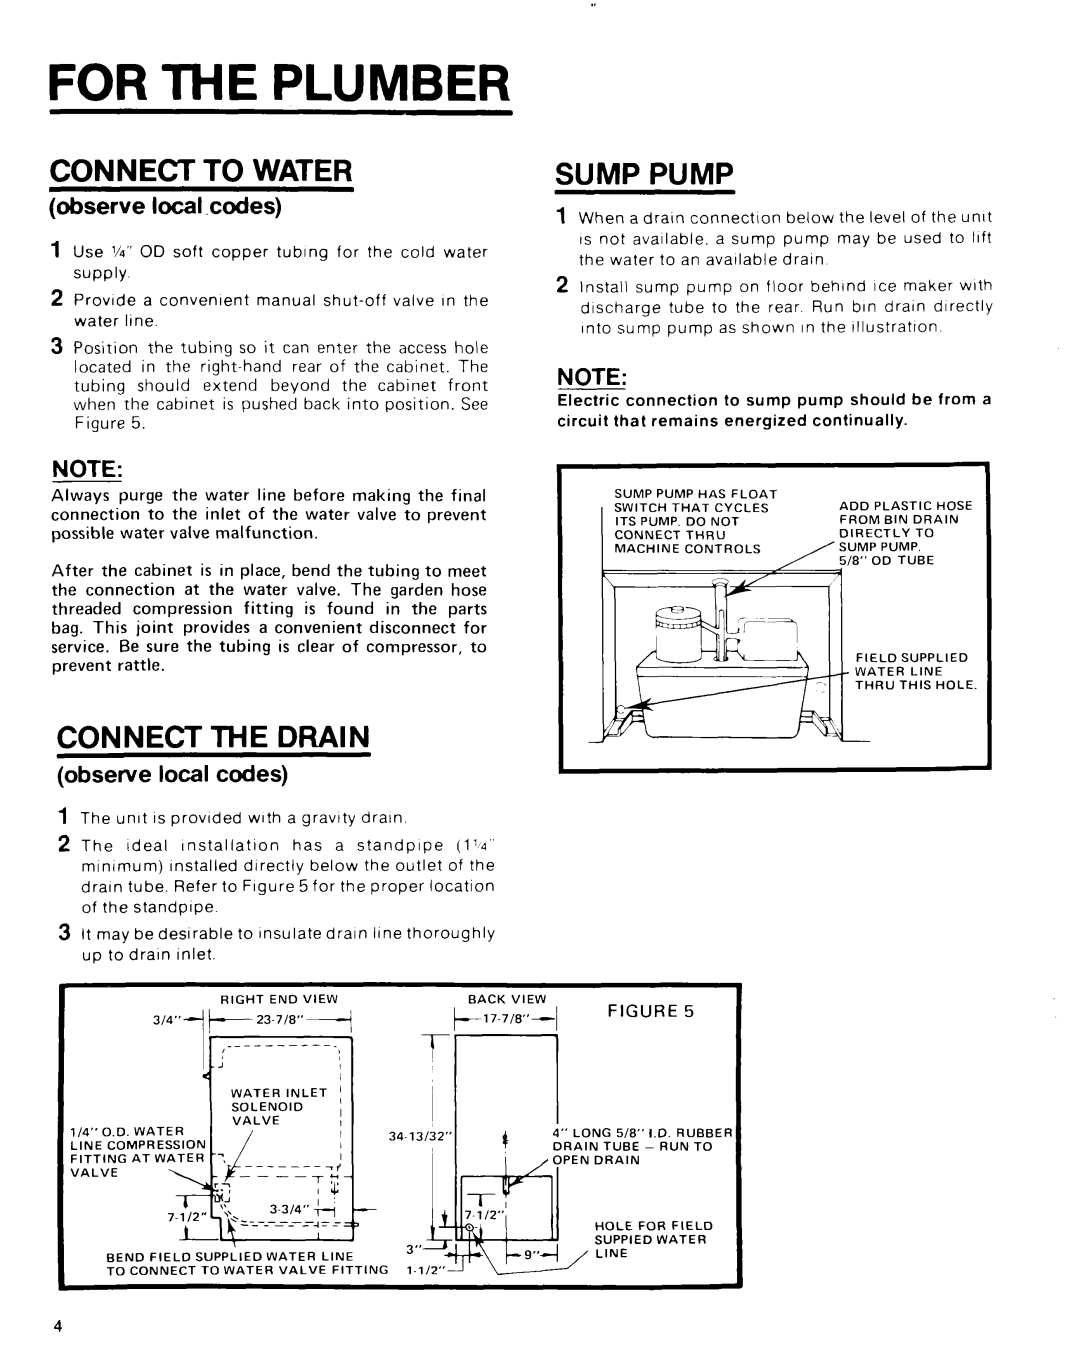 Whirlpool 50 manual For The Plumber, Connect To Water, Sump Pump, Connect The Drain 